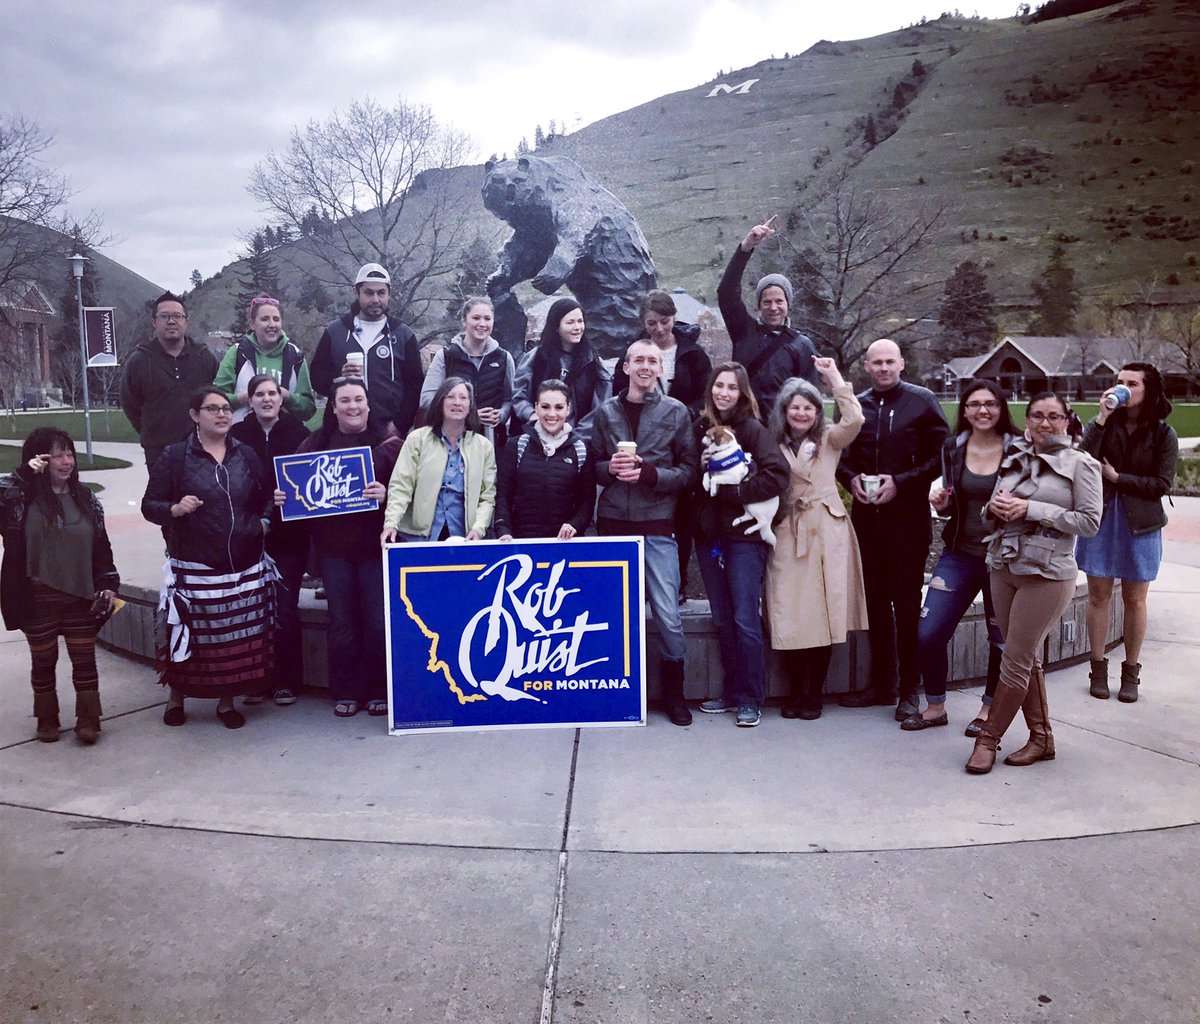 Here we go #UMGriz! First van of early voters on our way! #robquist #teamquist #MTPol https://t.co/Pxr7RWTiJJ